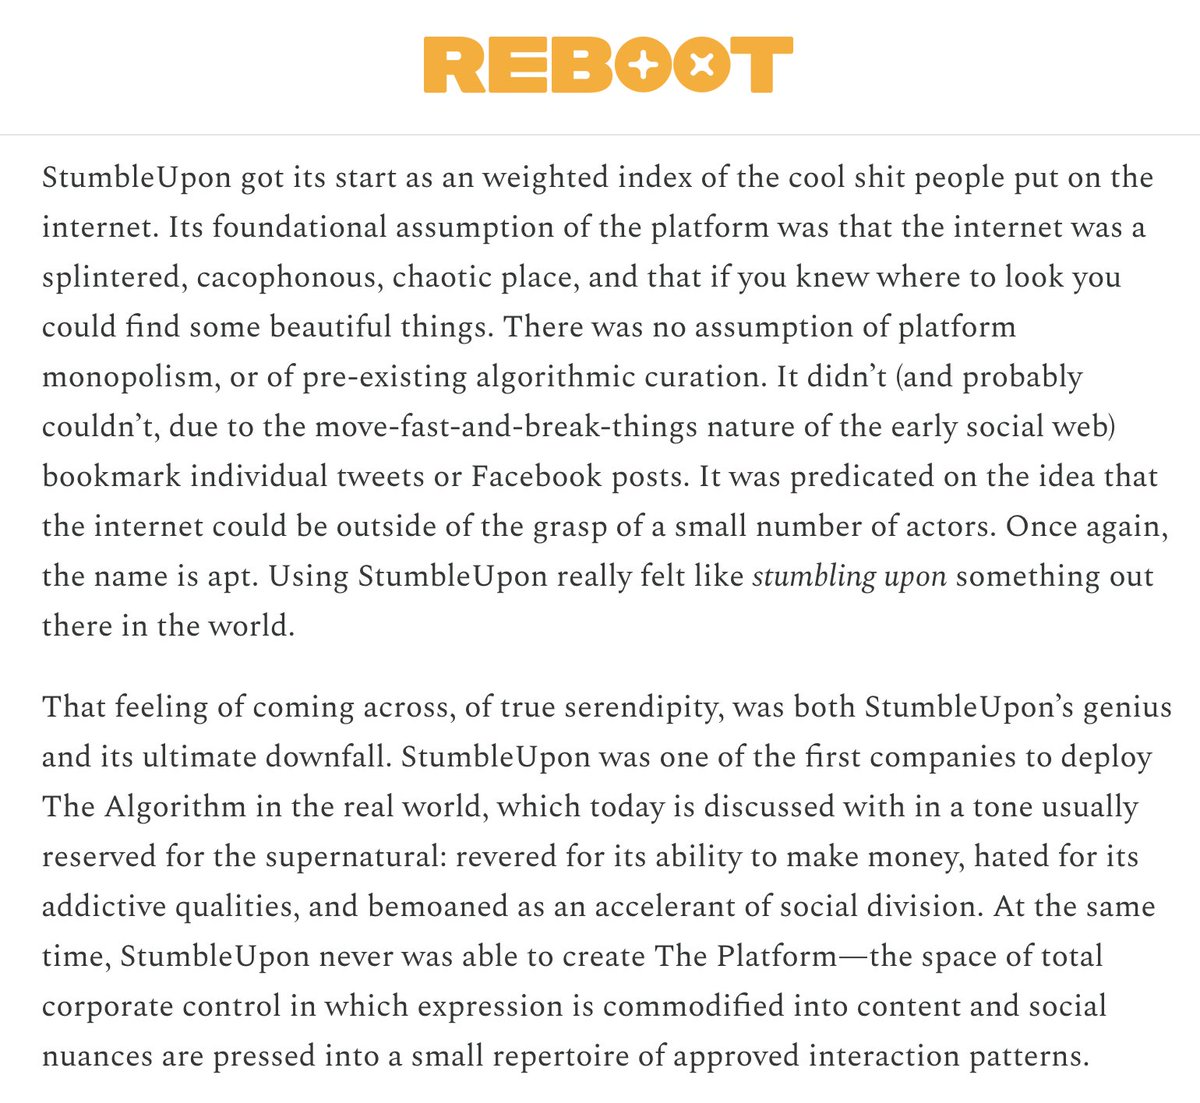 wrote a piece for @reboot_hq and @kernel_magazine about StumbleUpon, randomness, the historical roots of The Algorithm™️, and the rose-colored glasses through which we look at the technological past! joinreboot.org/p/the-serendip…